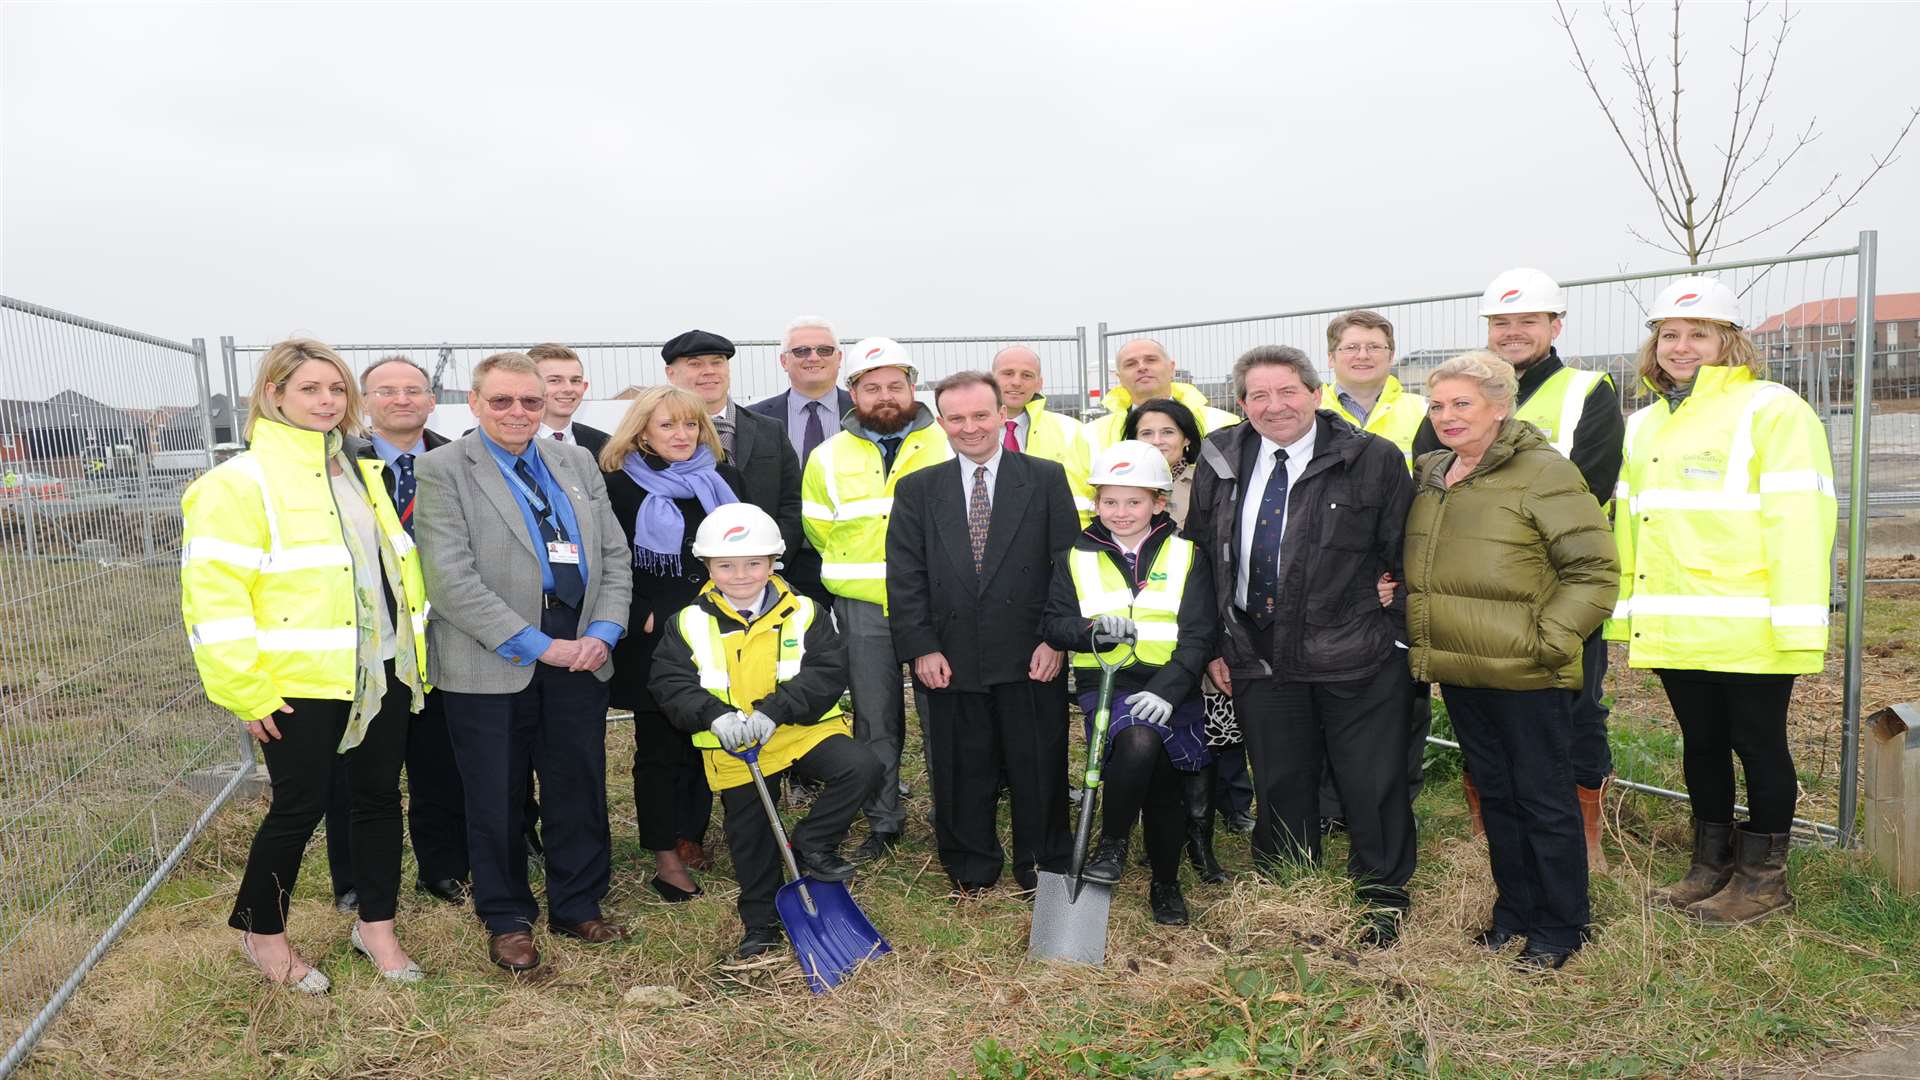 Turning of the sod ceremony to mark the start of work on the new Thistle Hill primary school